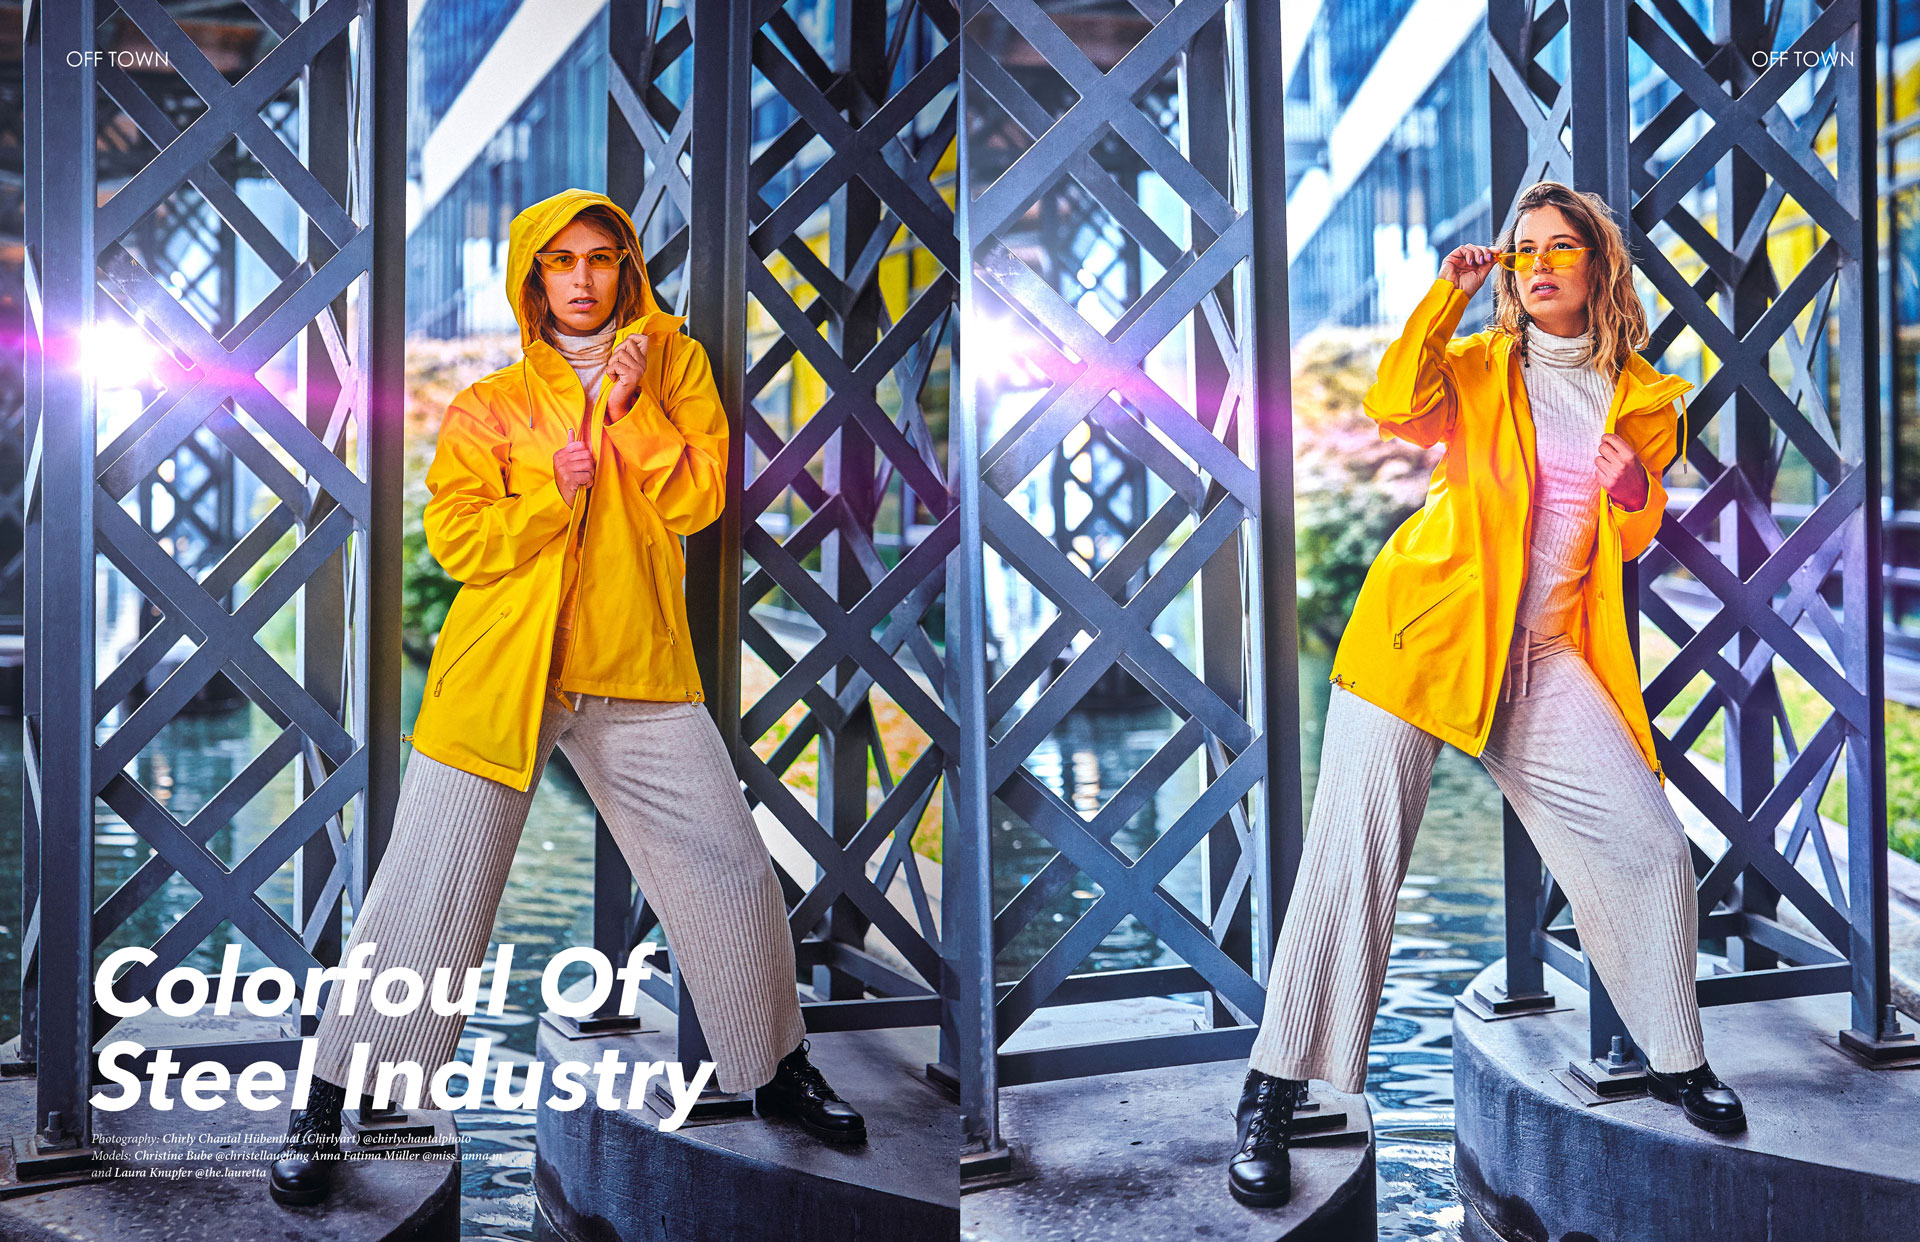 Off Town Magazine Colorfoul of Steel Industry